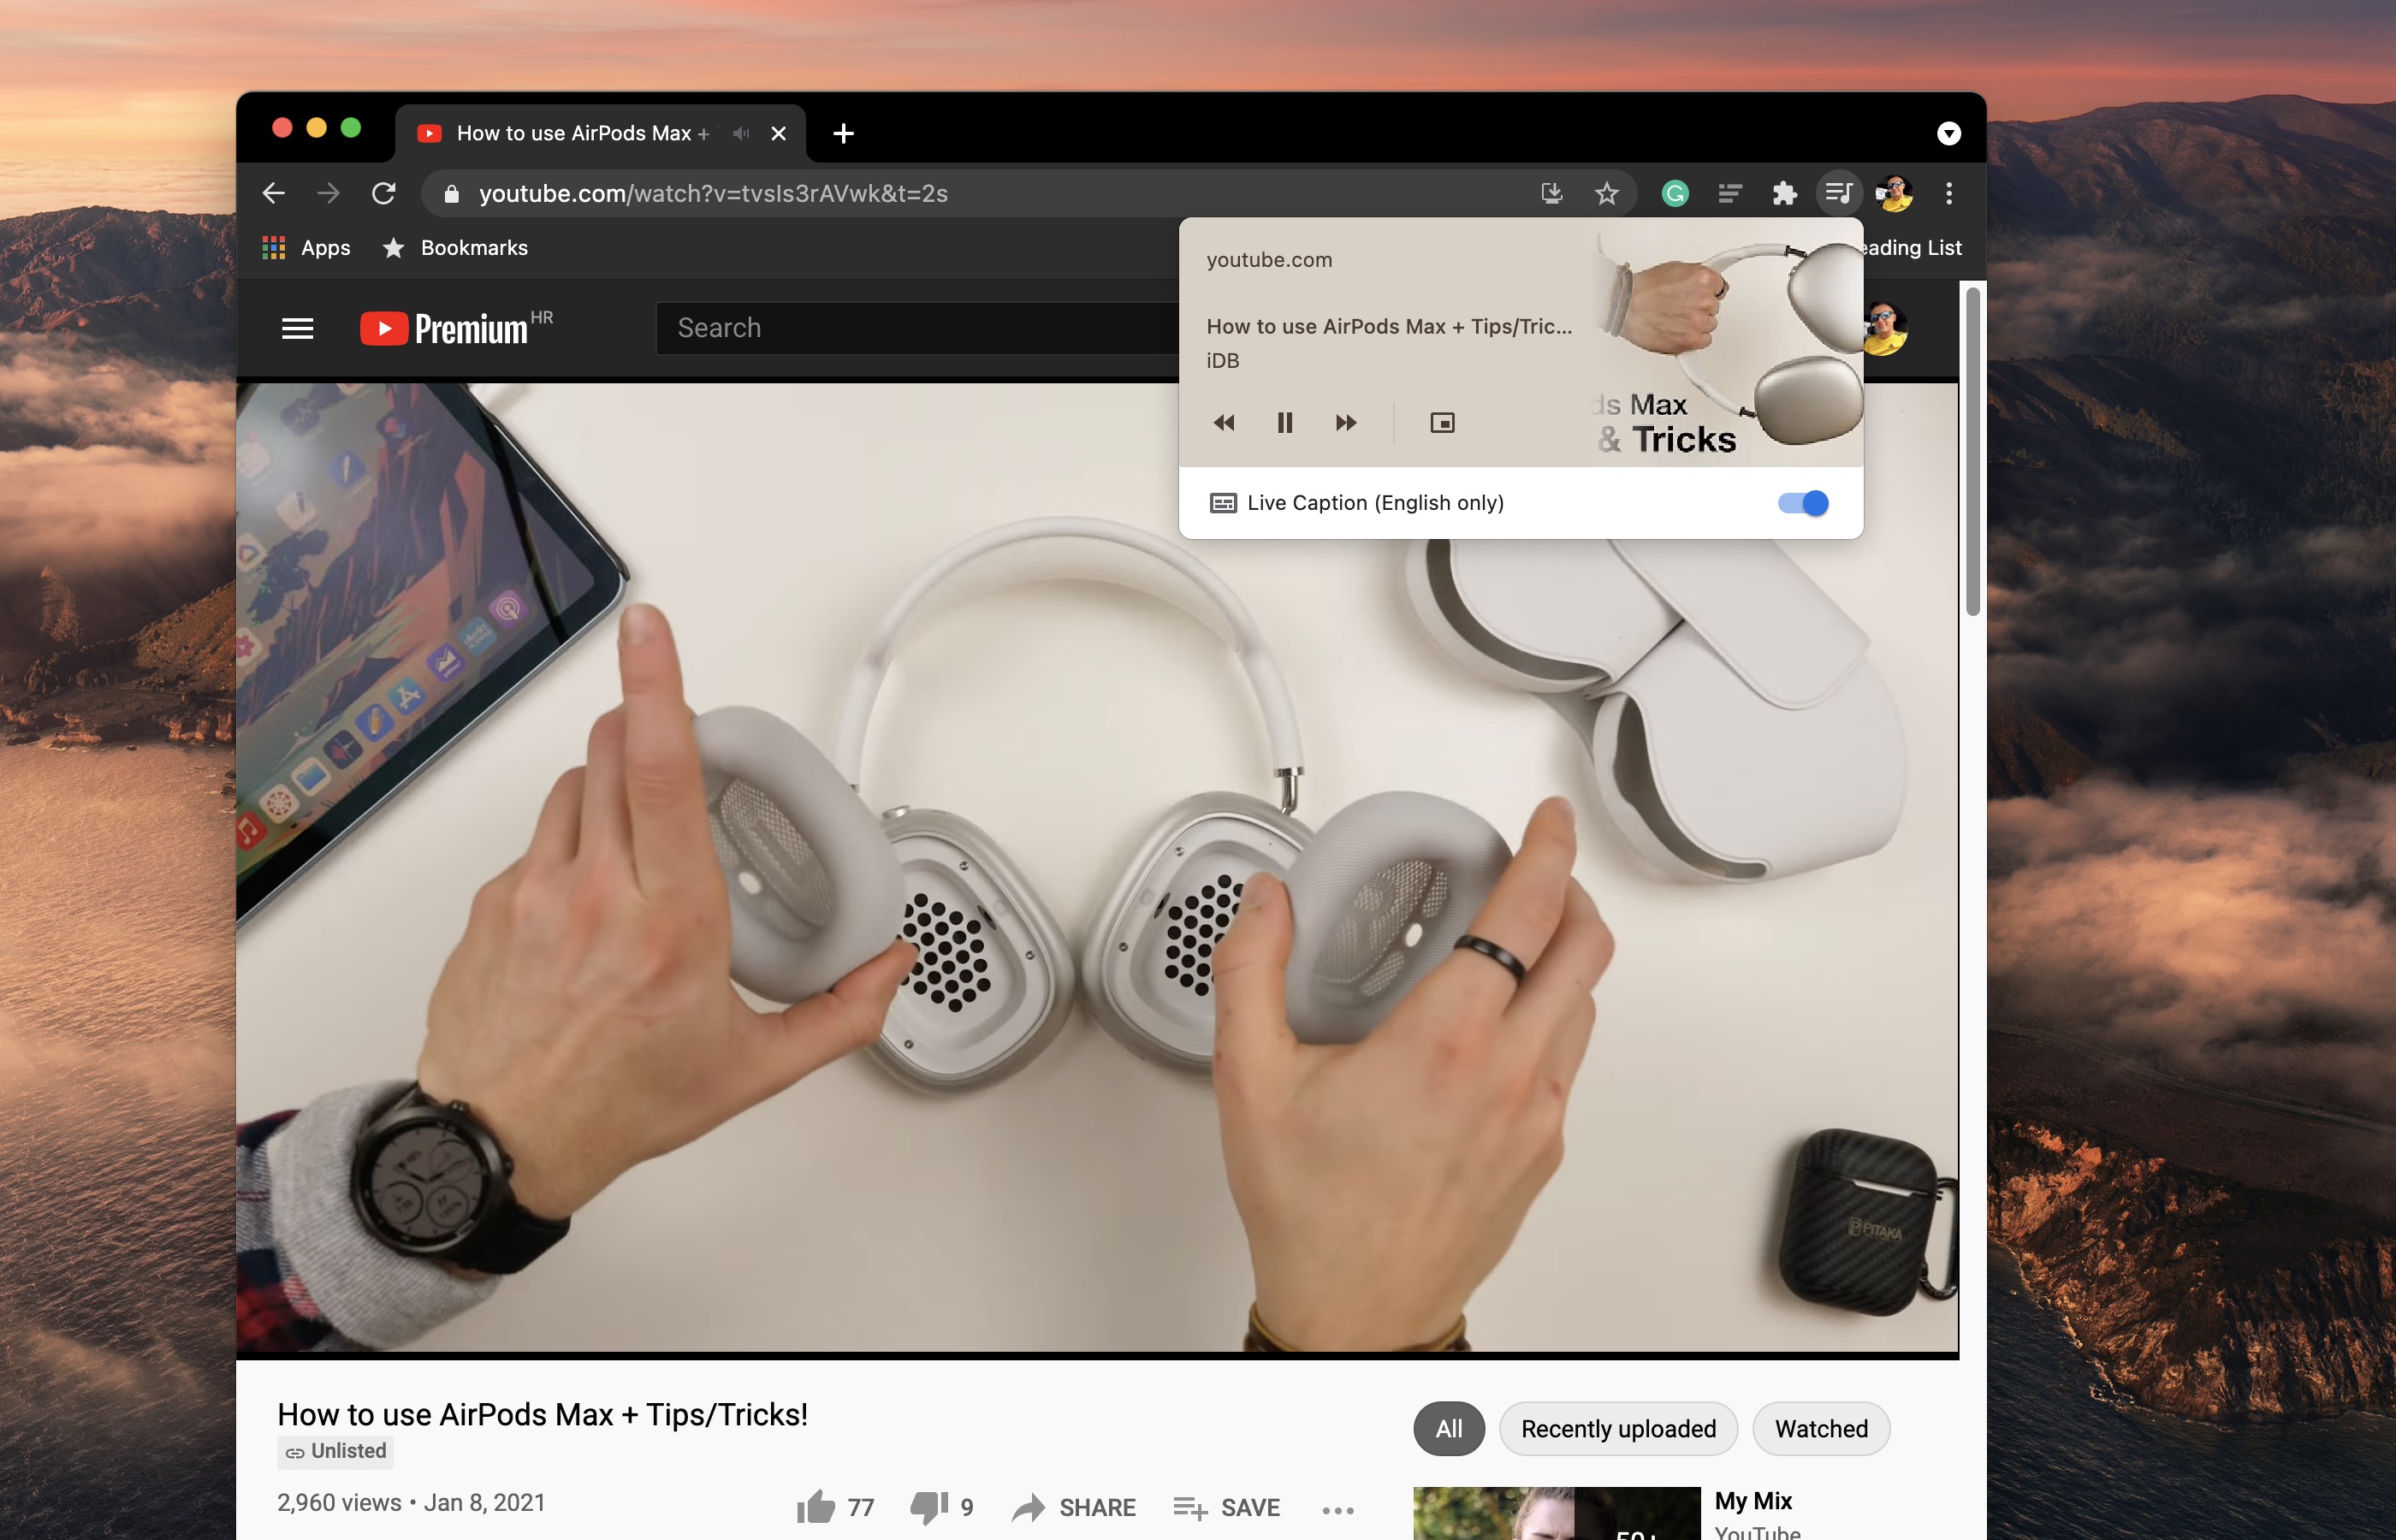 A macOS screenshot showing Google Chrome for Mac with the playback controls for a YouTube video along with the Live Caption toggle